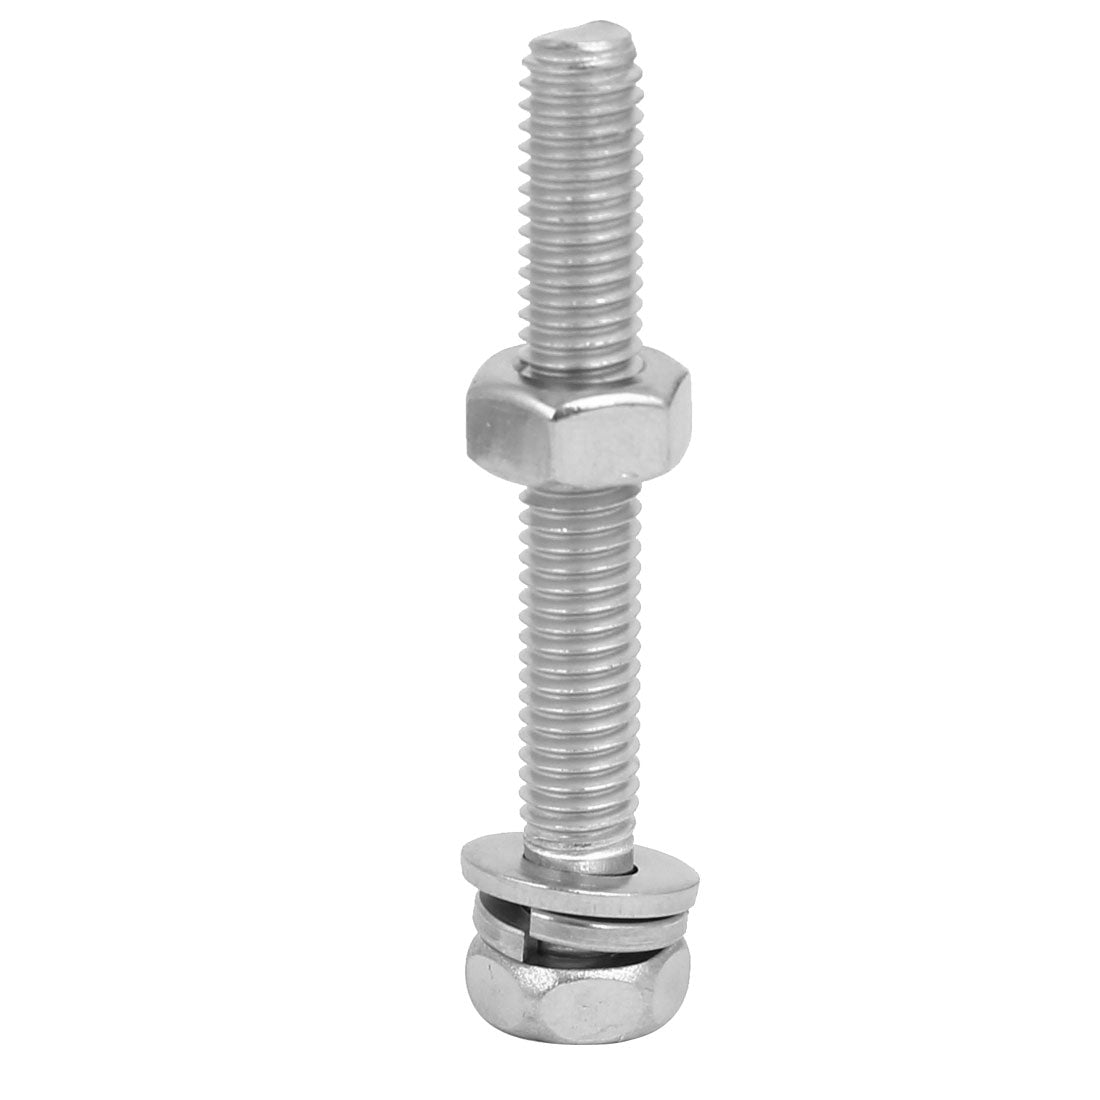 uxcell Uxcell M6 x 45mm 304 Stainless Steel Phillips Hex Head Bolts Nuts w Washers 5 Sets